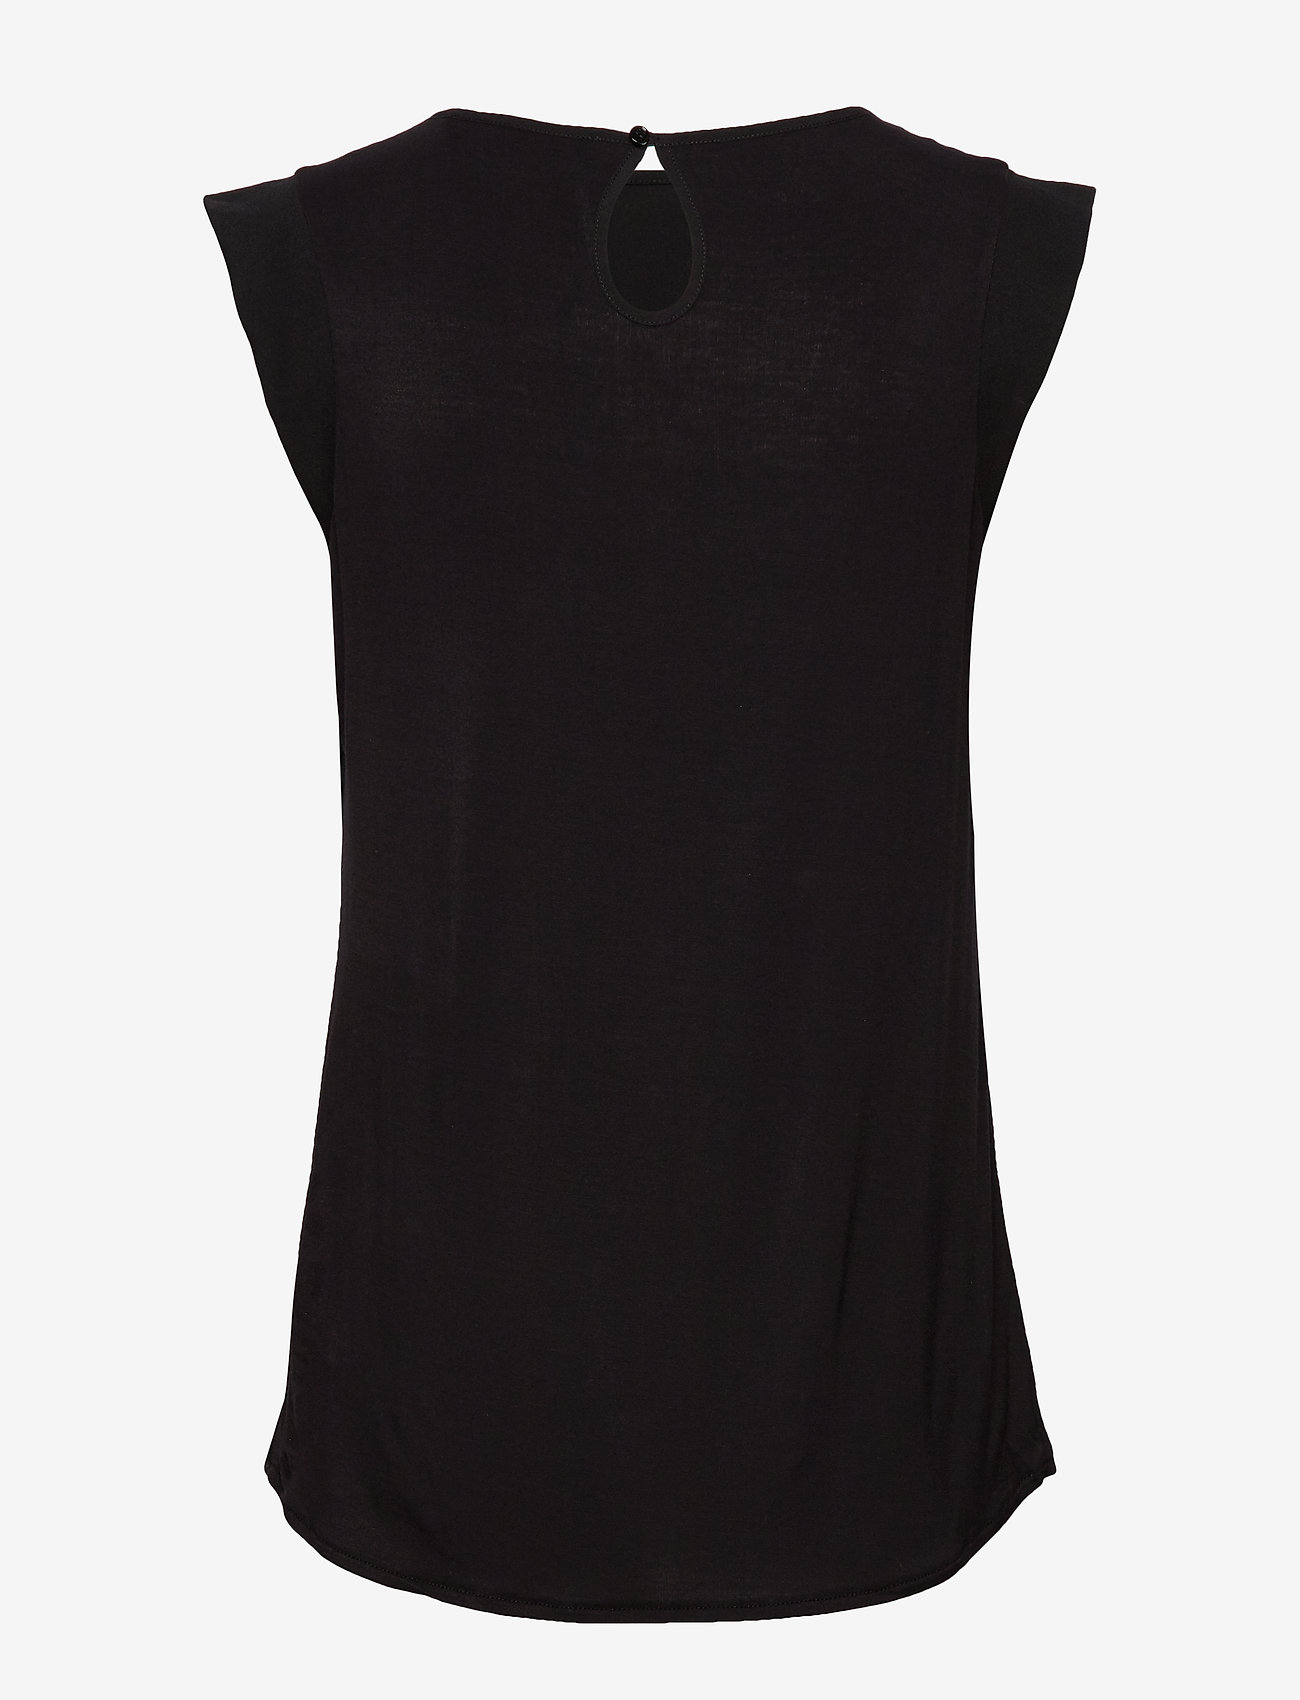 French Connection - POLLY PLAINS CAPPEDTEE - Ärmellose tops - black - 1